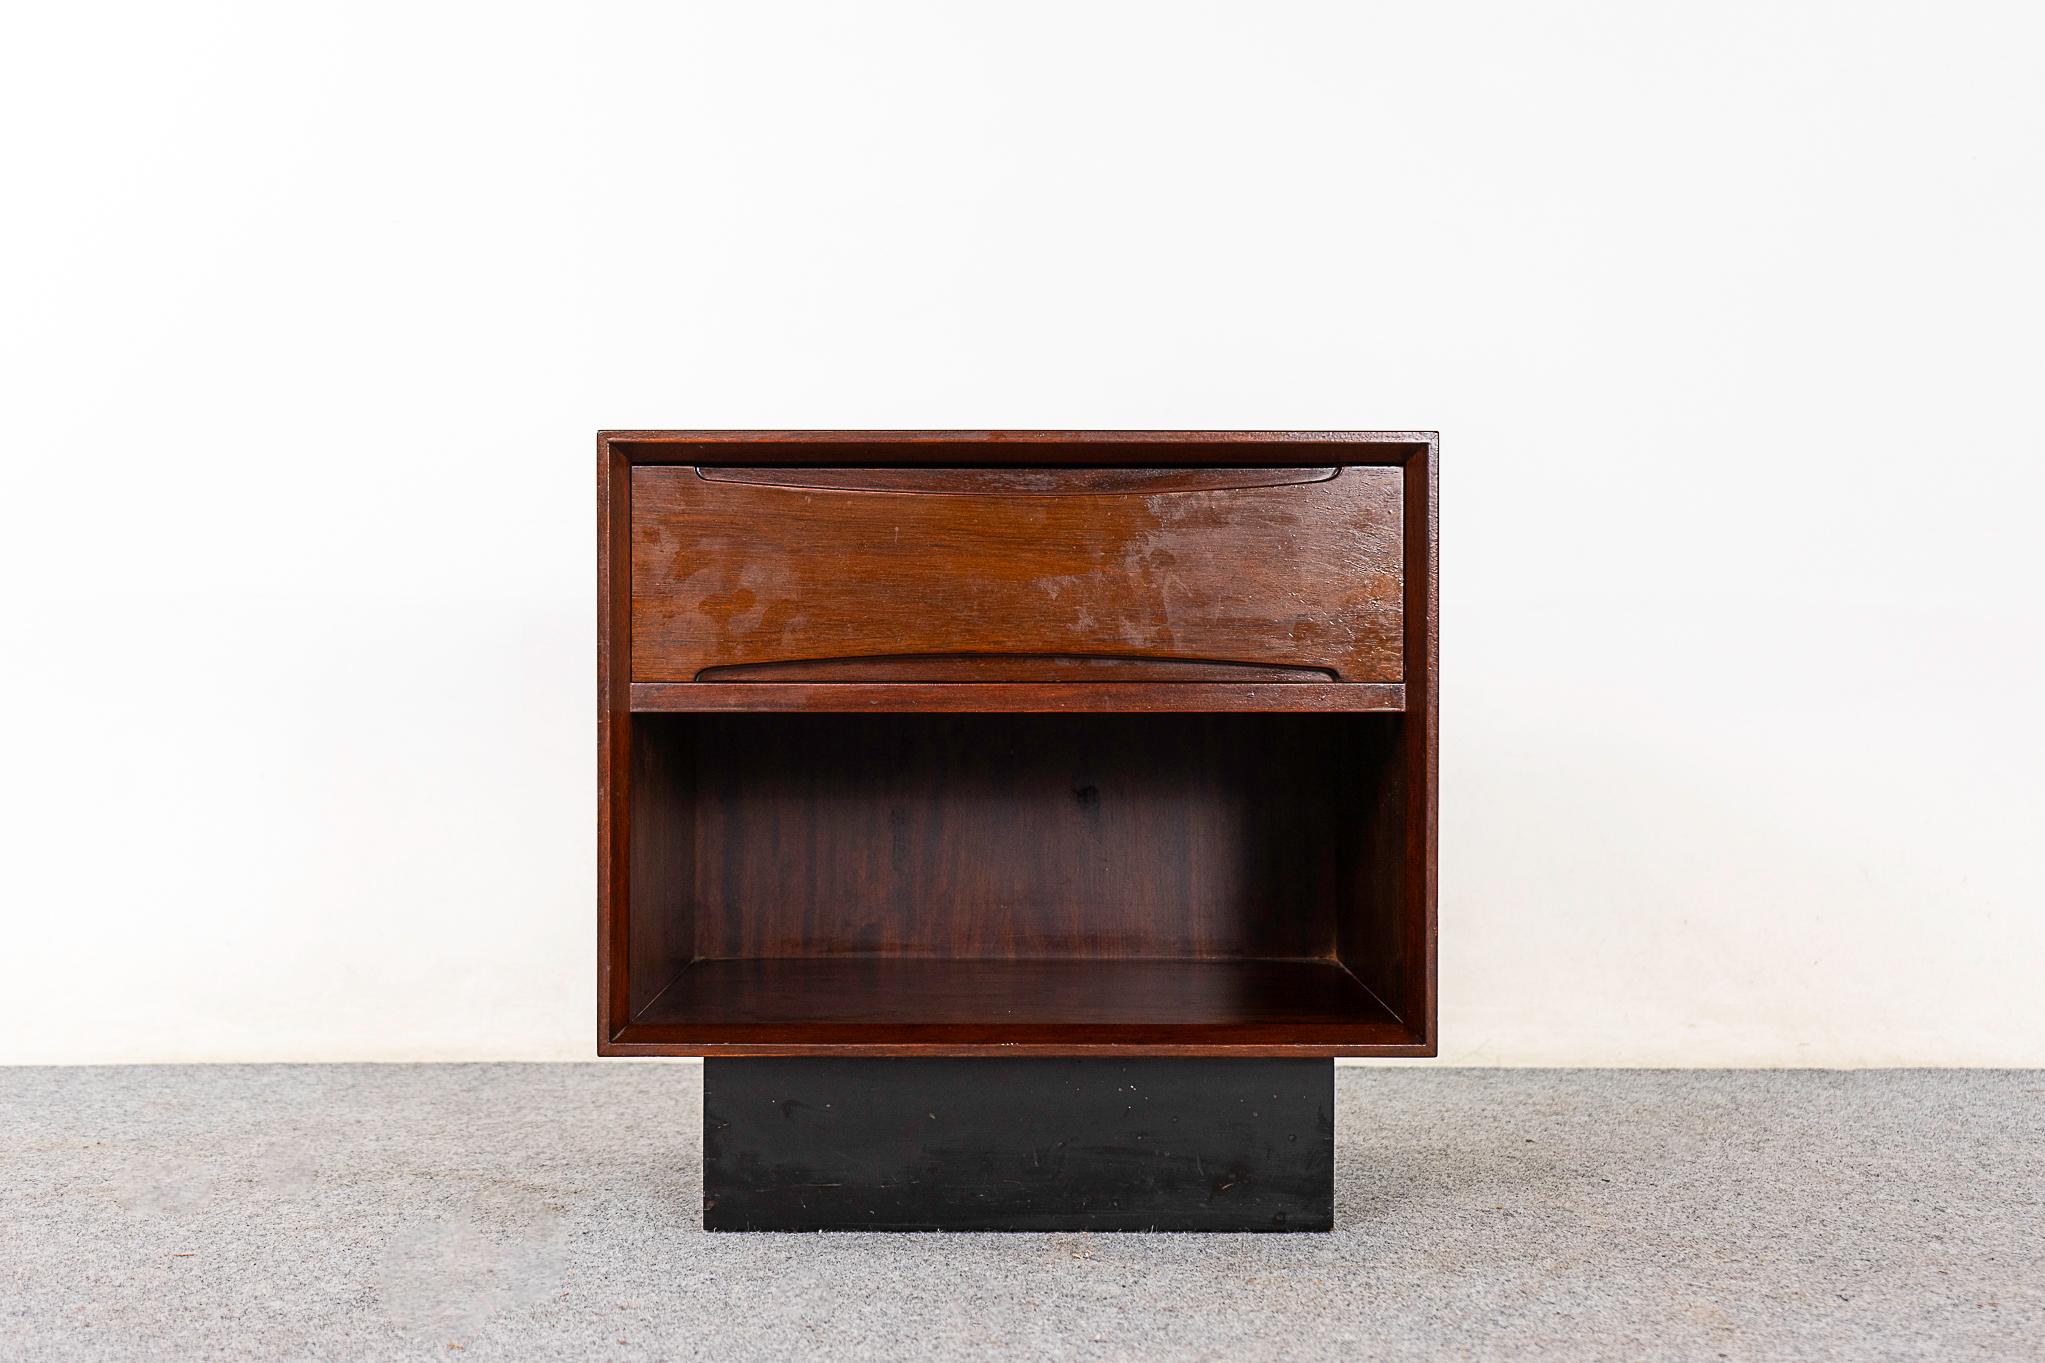 Rosewood bedside table by Drylund, circa 1960's. Compact size with dovetailed drawer and open stoarge cubby.

Unrestored item with option to purchase in restored condition for an additional $100 USD. Restoration includes: repairs, sanding, staining